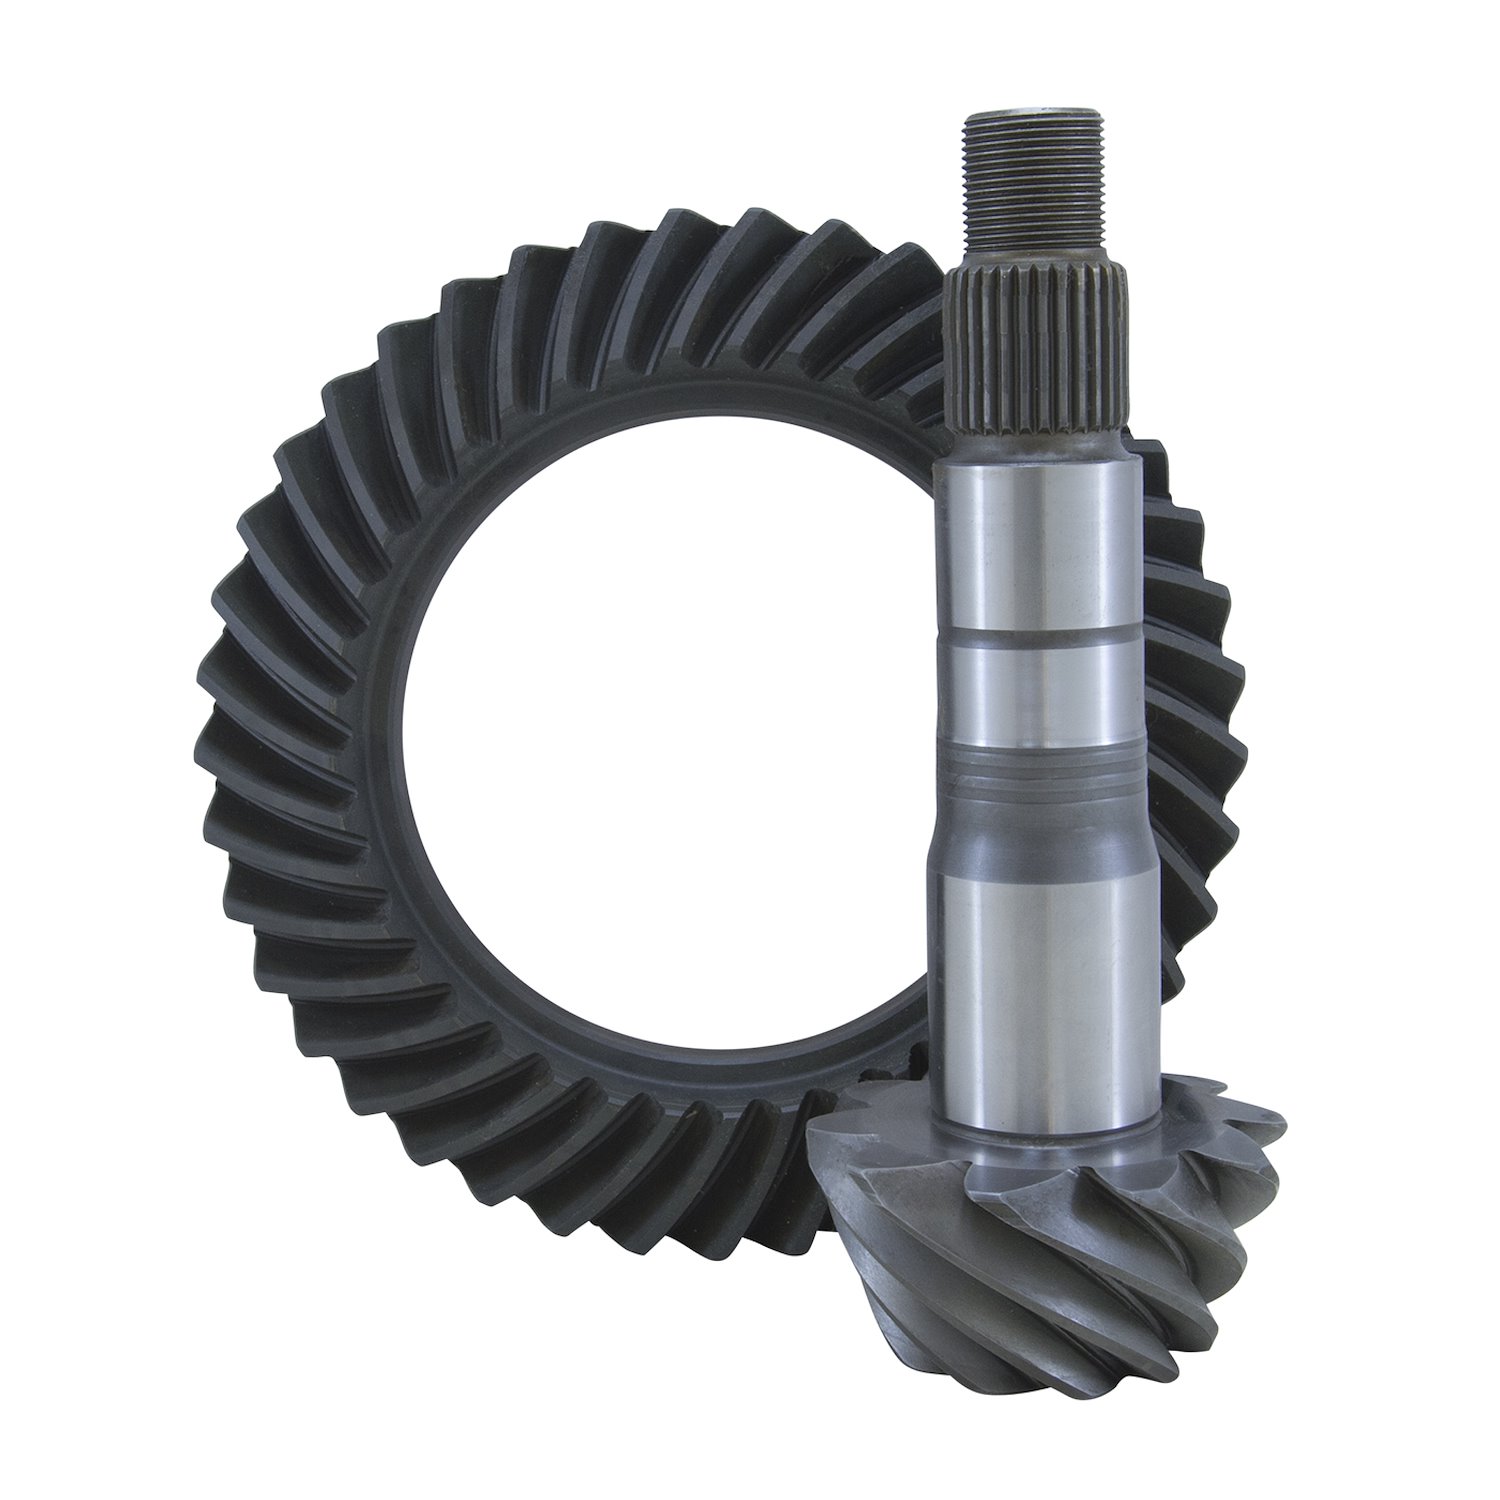 USA Standard ZG T100-456 Ring & Pinion Gear Set, For Toyota T100 And Tacoma, 4.56 Ratio